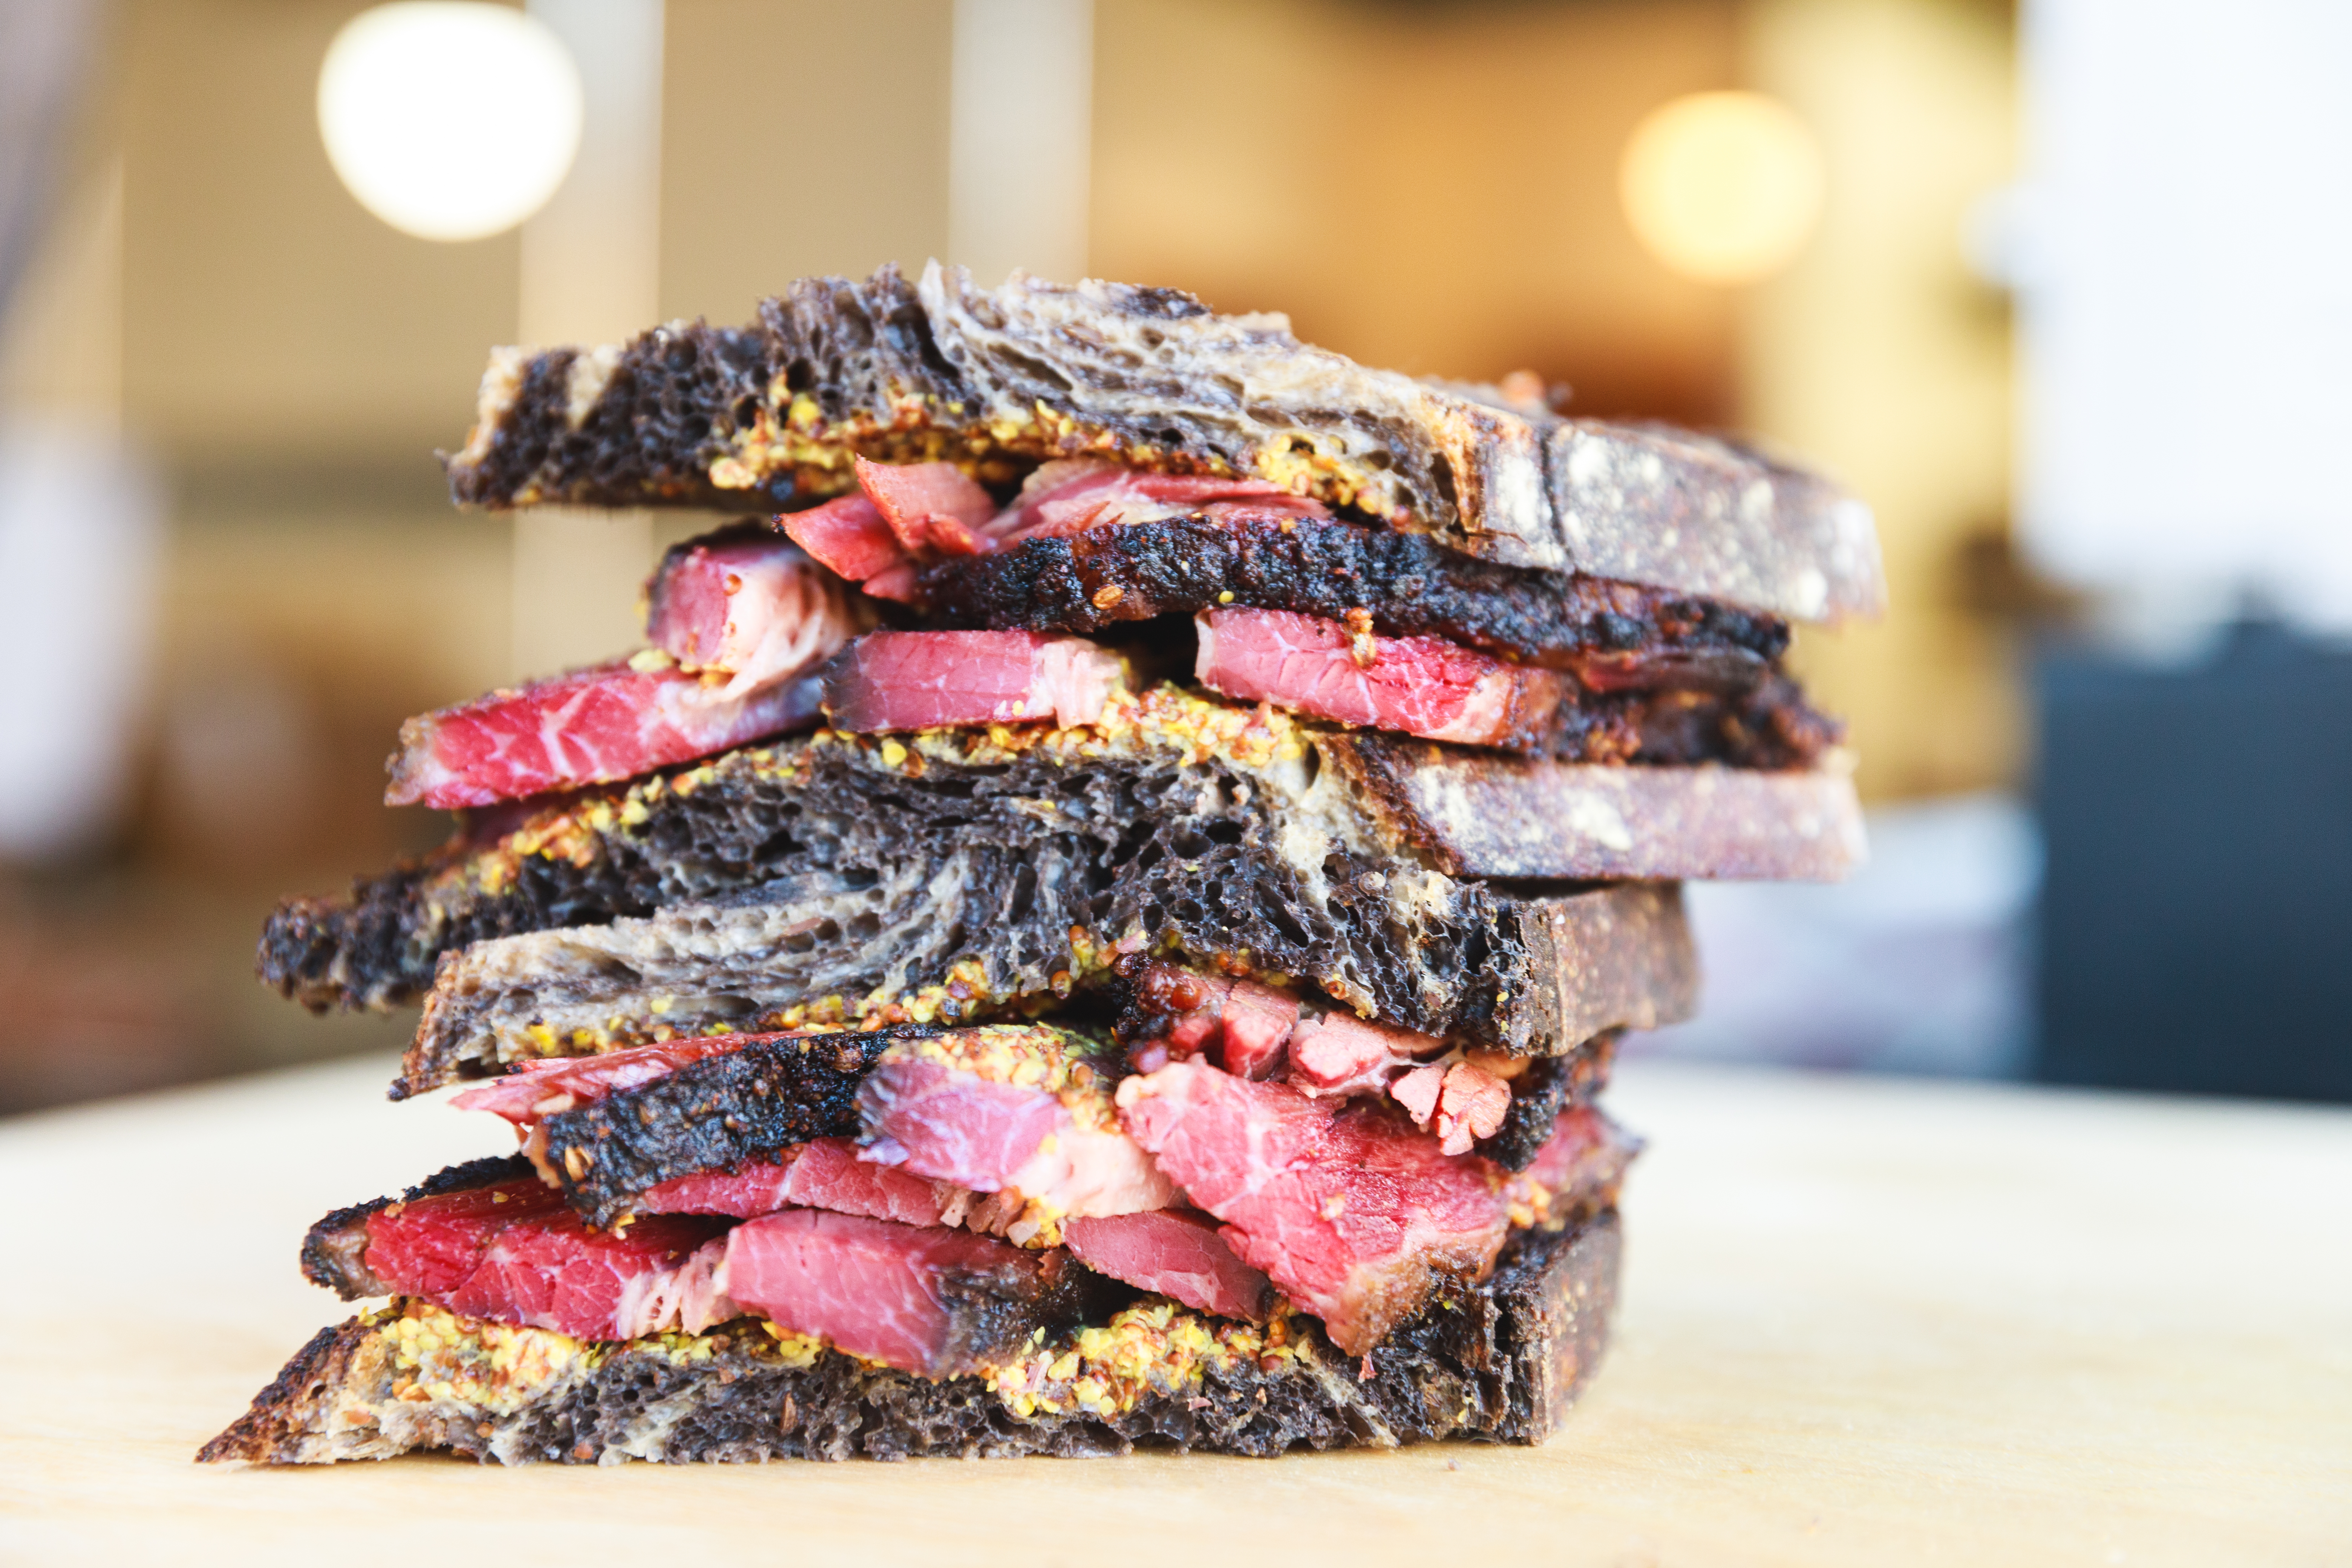 Two thick pastrami sandwiches stacked on top of each other.